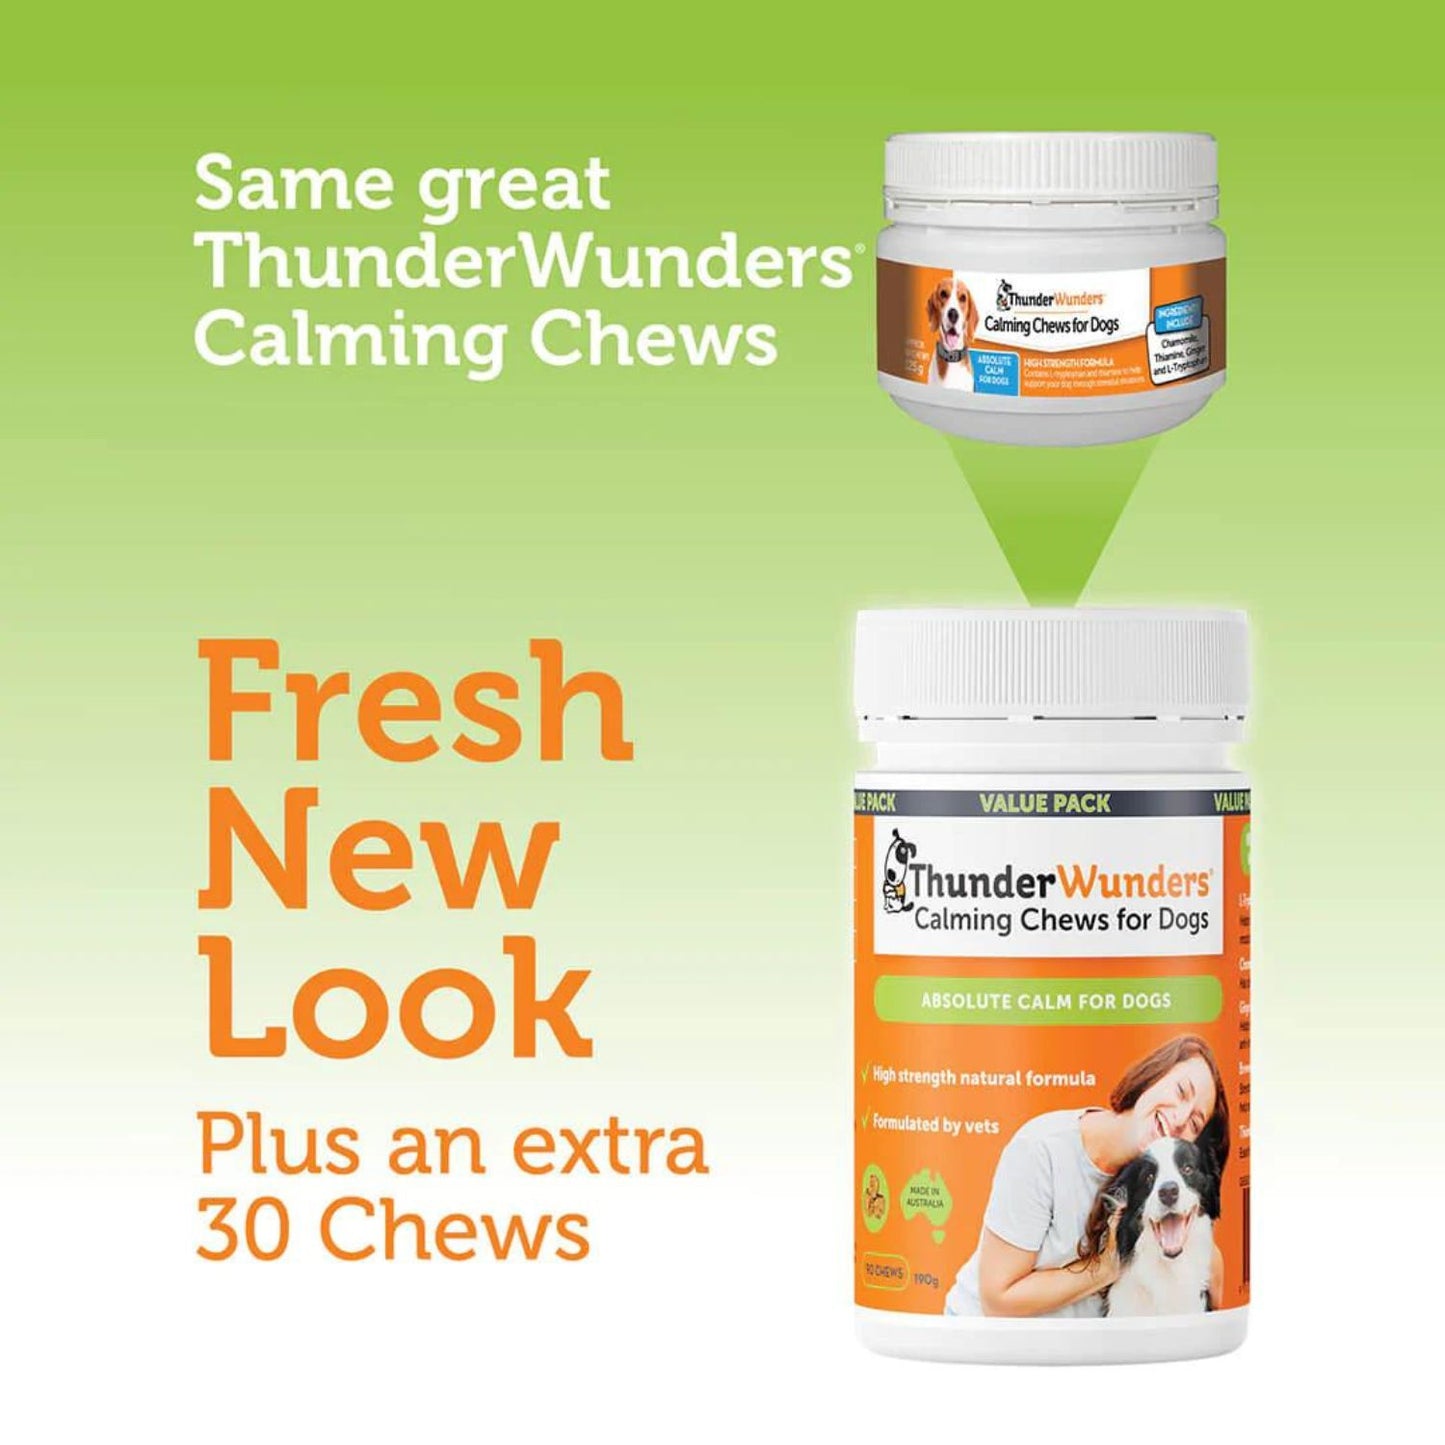 ThunderWunders Calming Chews For Dogs